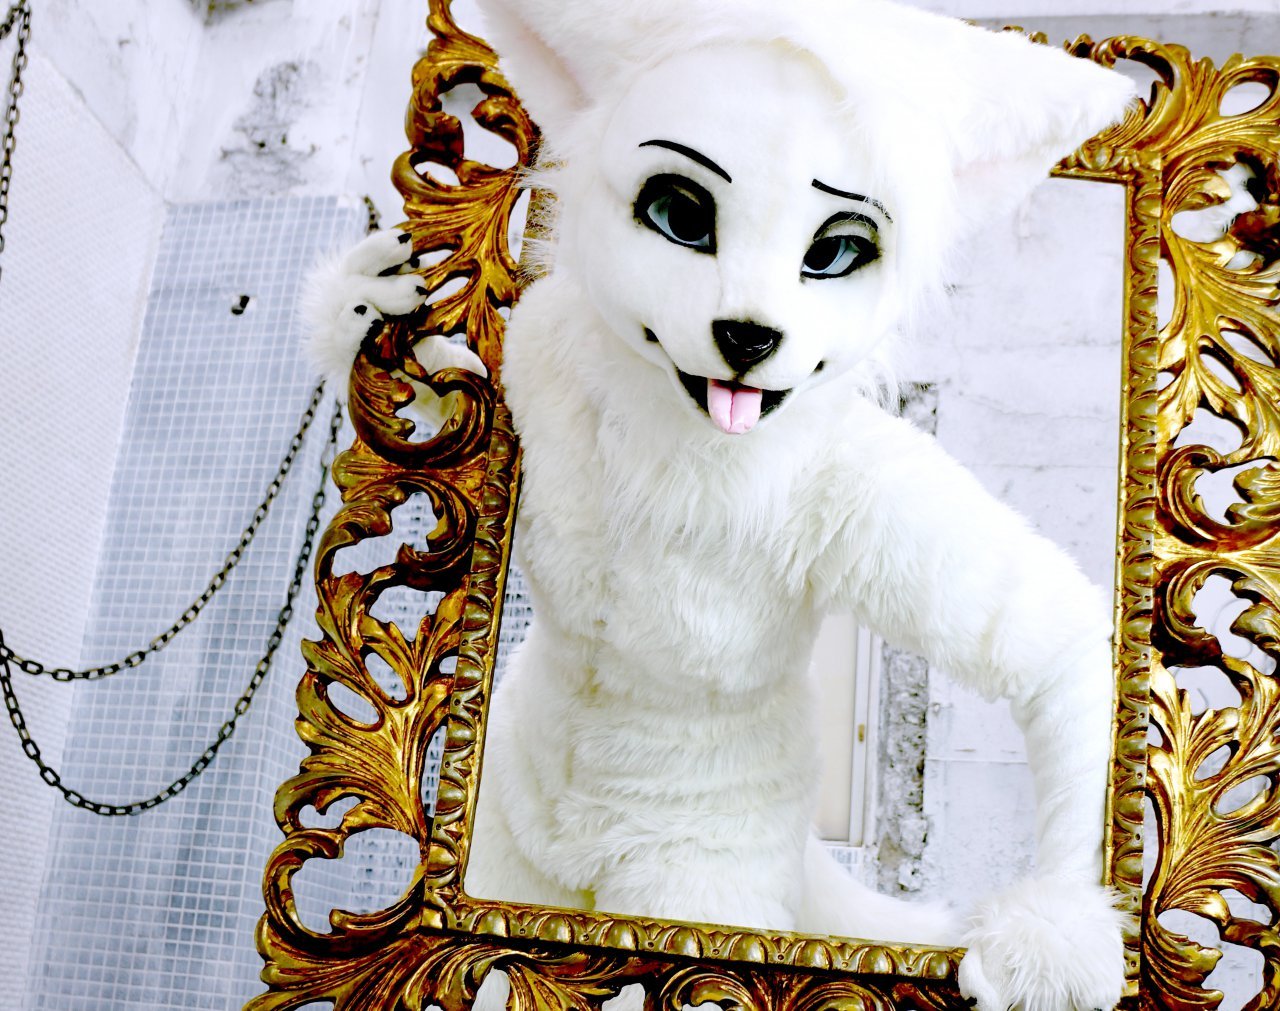 OUT frame - by RadyWolf Japanese fursuits seem to almost always be super adorable.